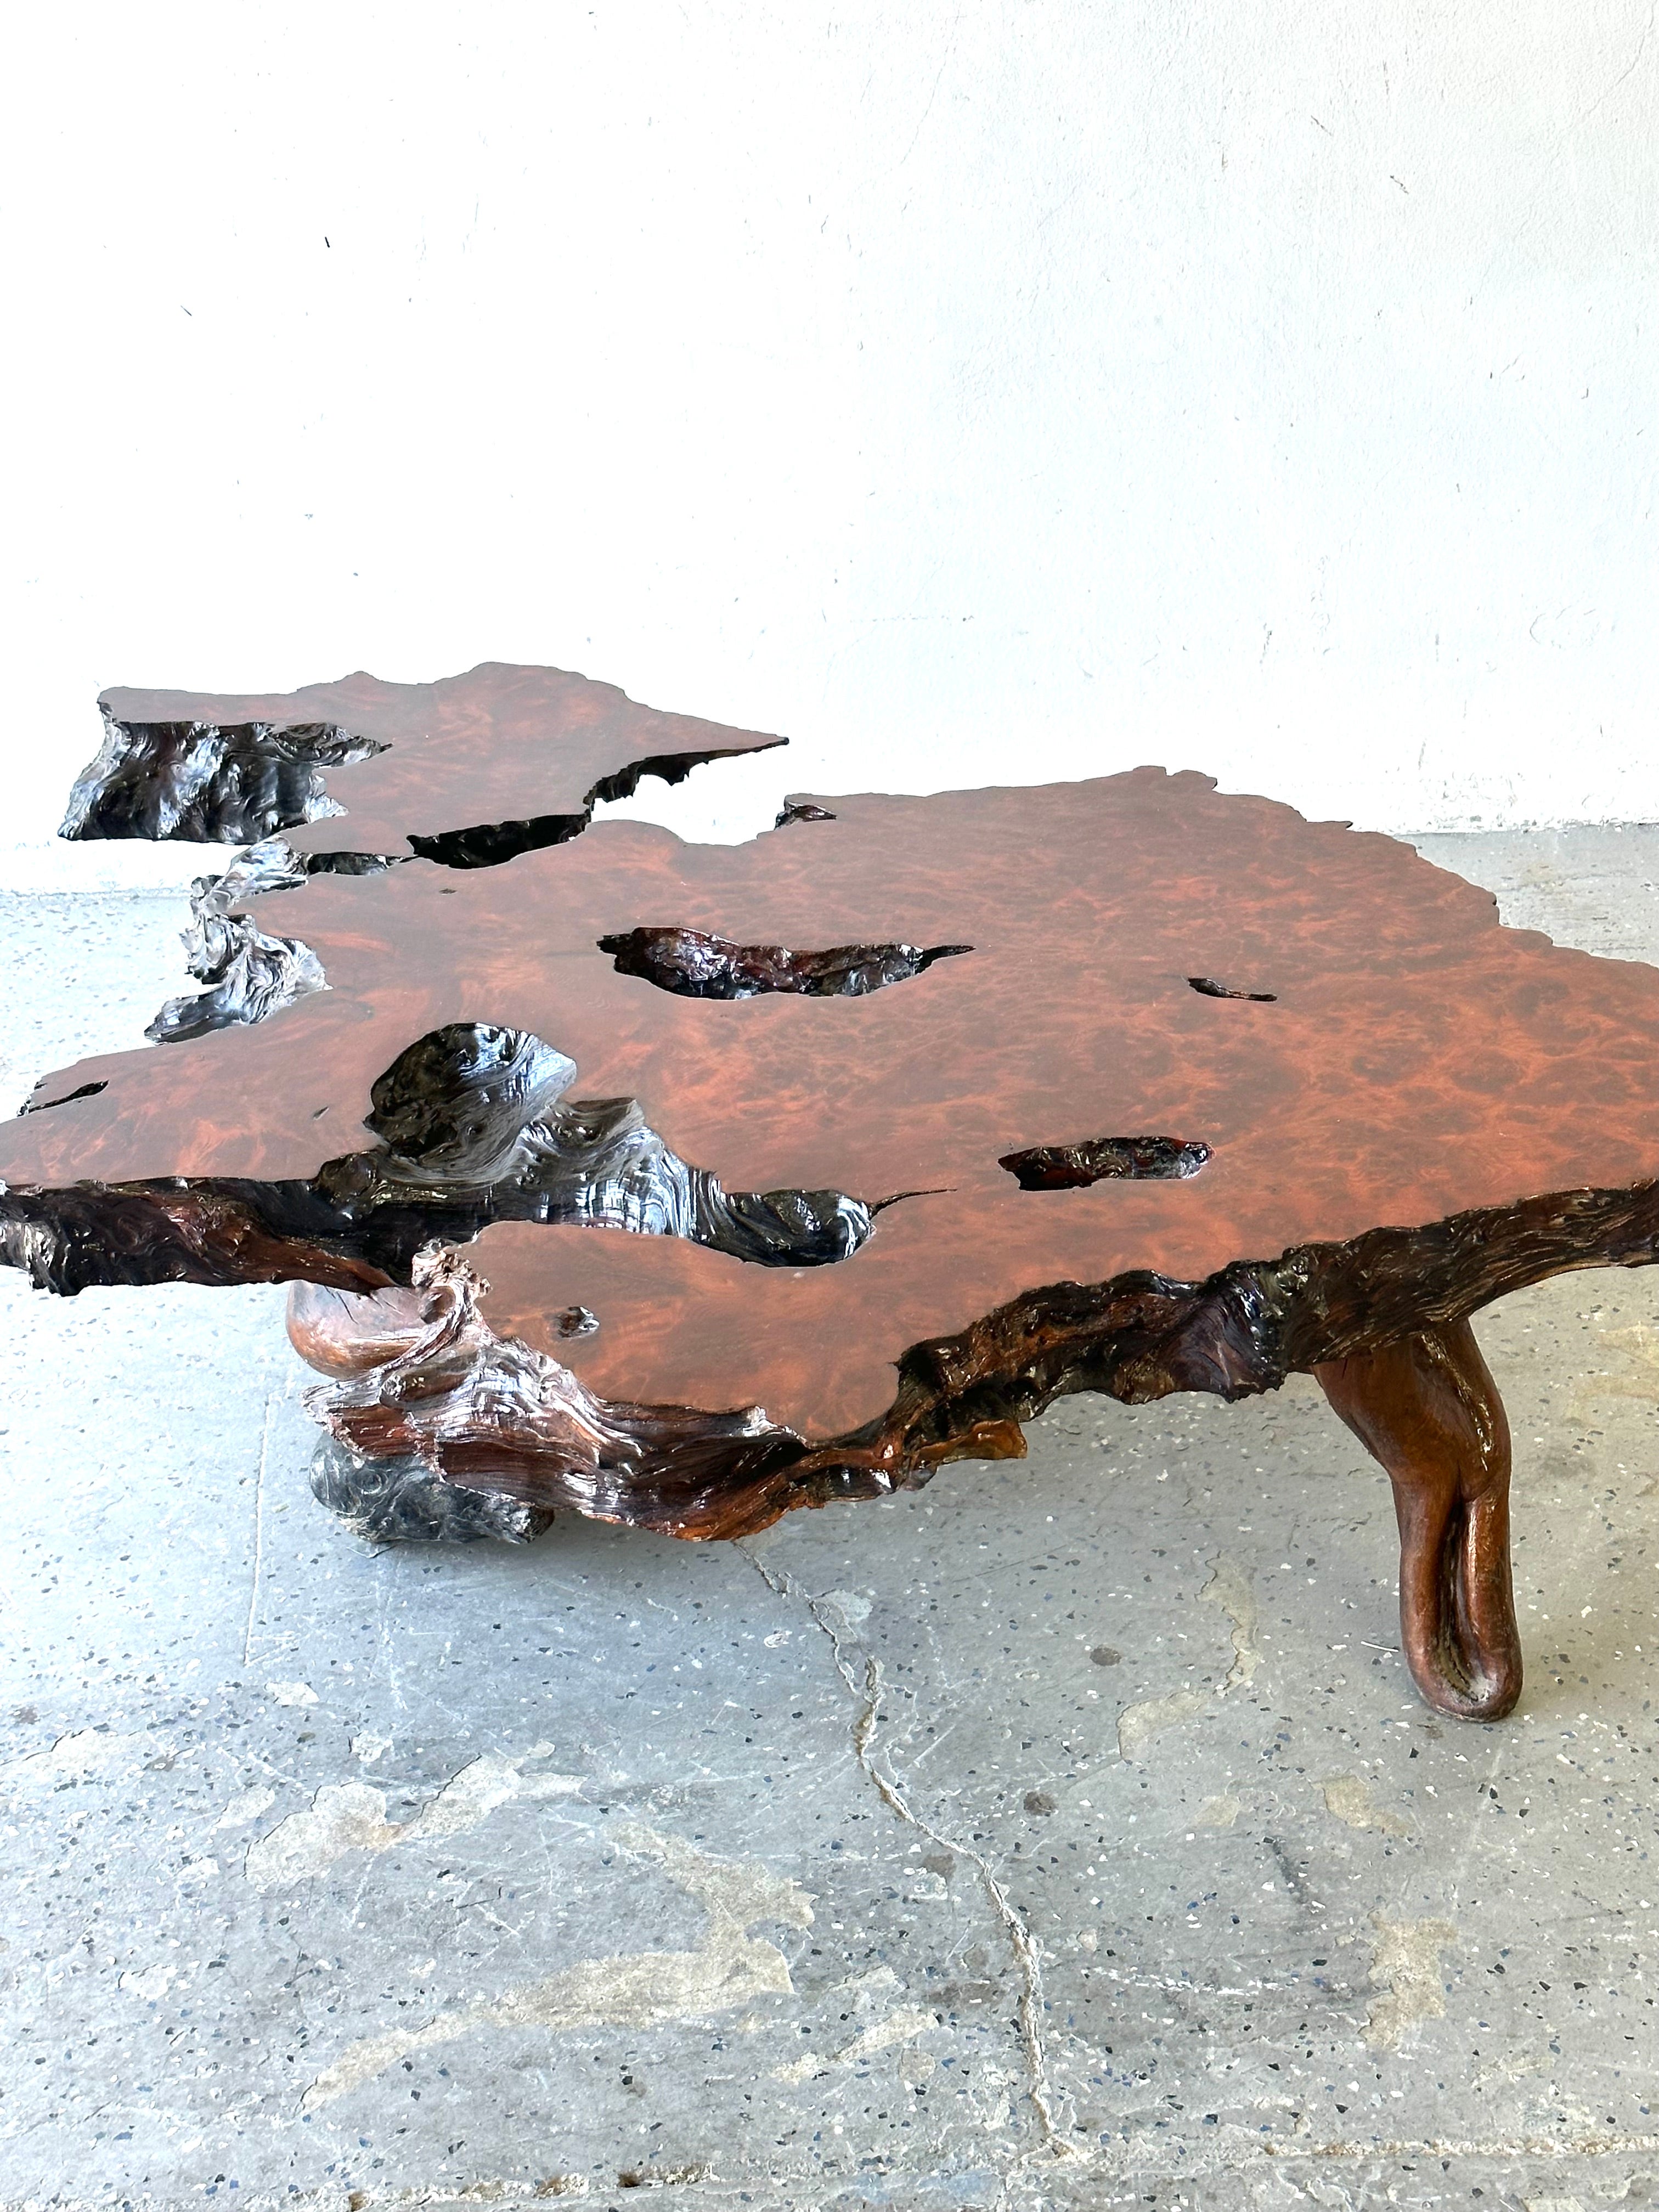 

Live Edge Burl RedWood Wood Coffee Table
This 1960s coffee table has a unique shaped root base and live edge surface. The burl is a natural red wood. The table is finished in a rich deep red stain with a lacquered finish. This coffee table is